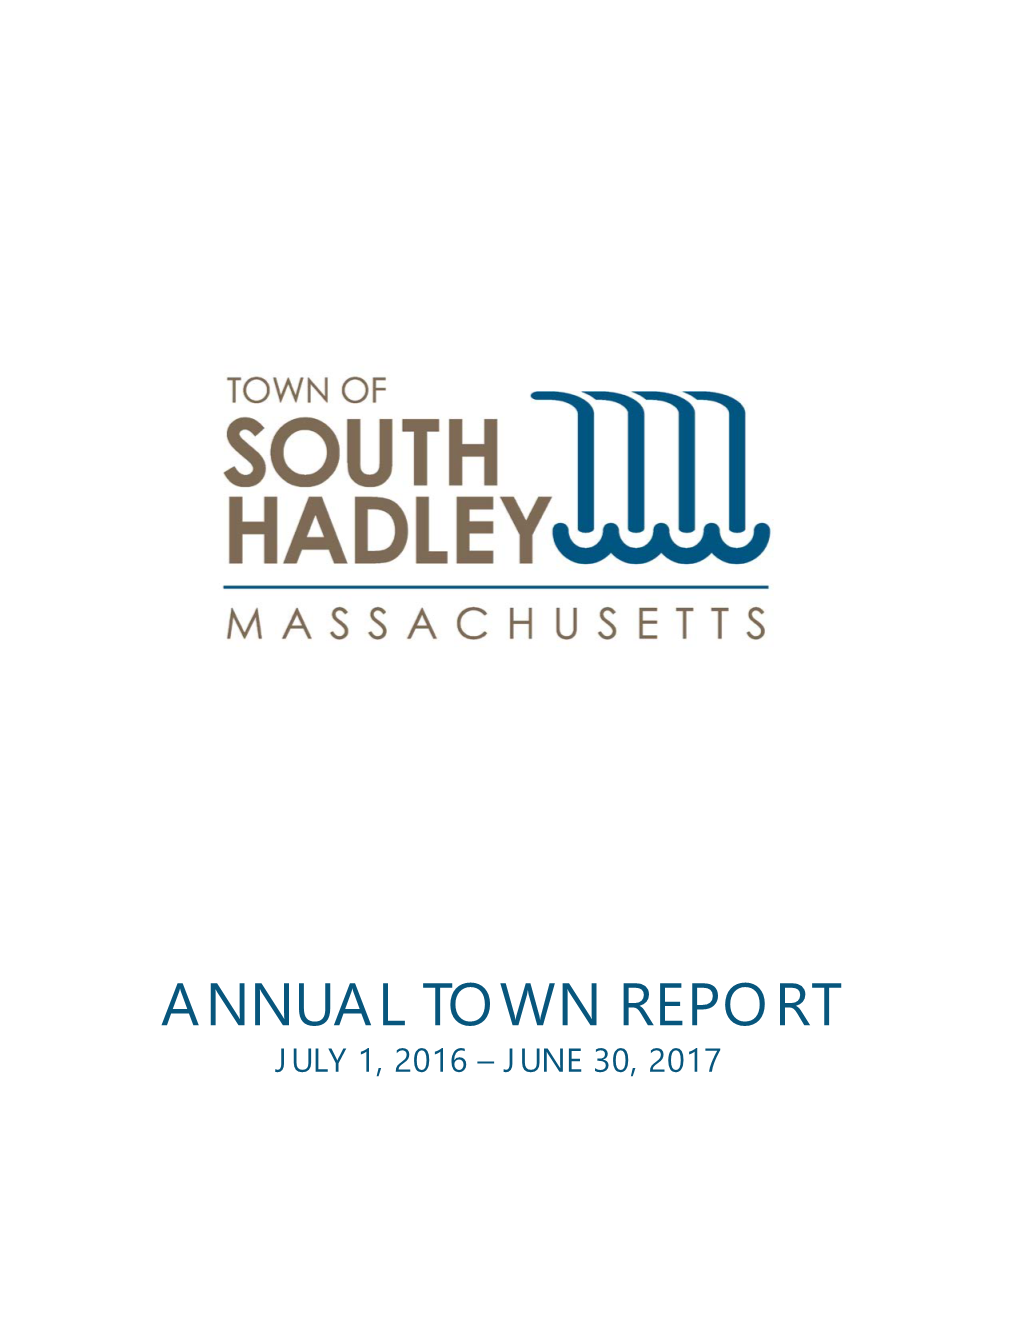 Annual Town Report July 1, 2016 – June 30, 2017